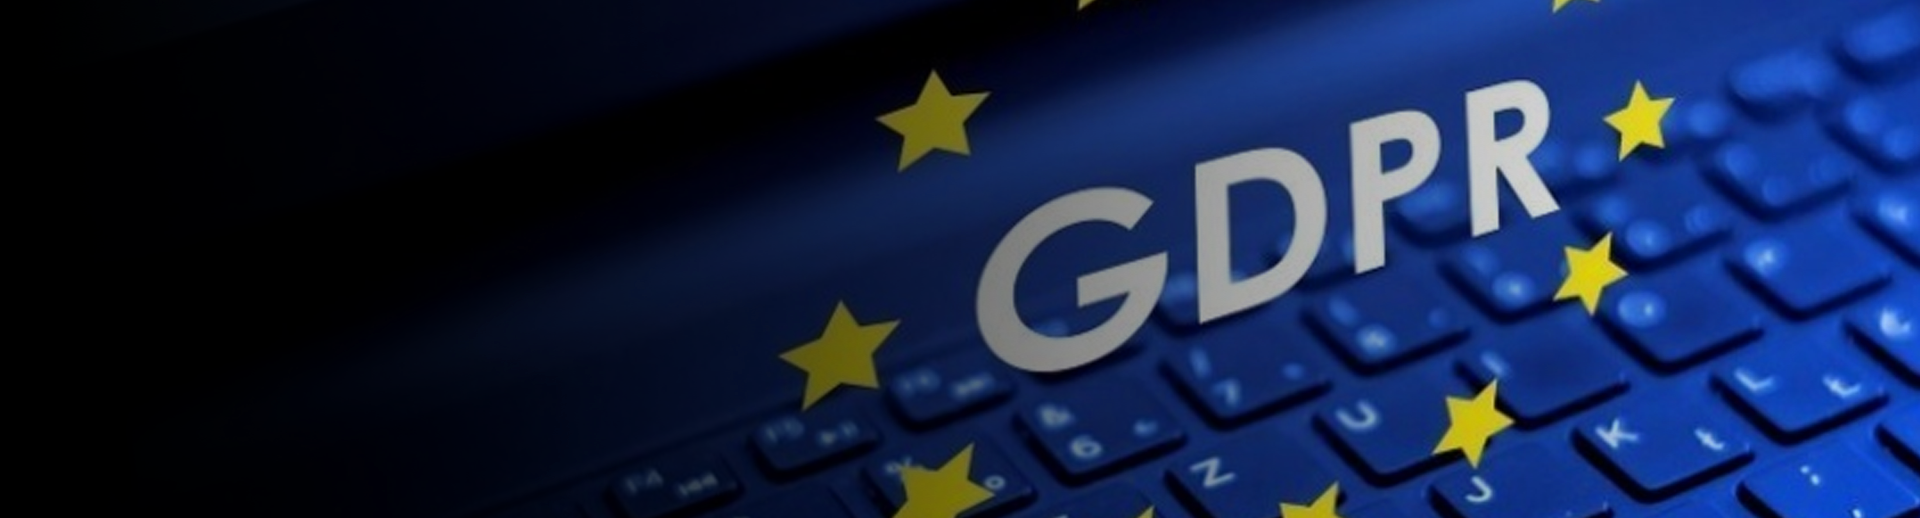 Making Your Website GDPR-Compliant